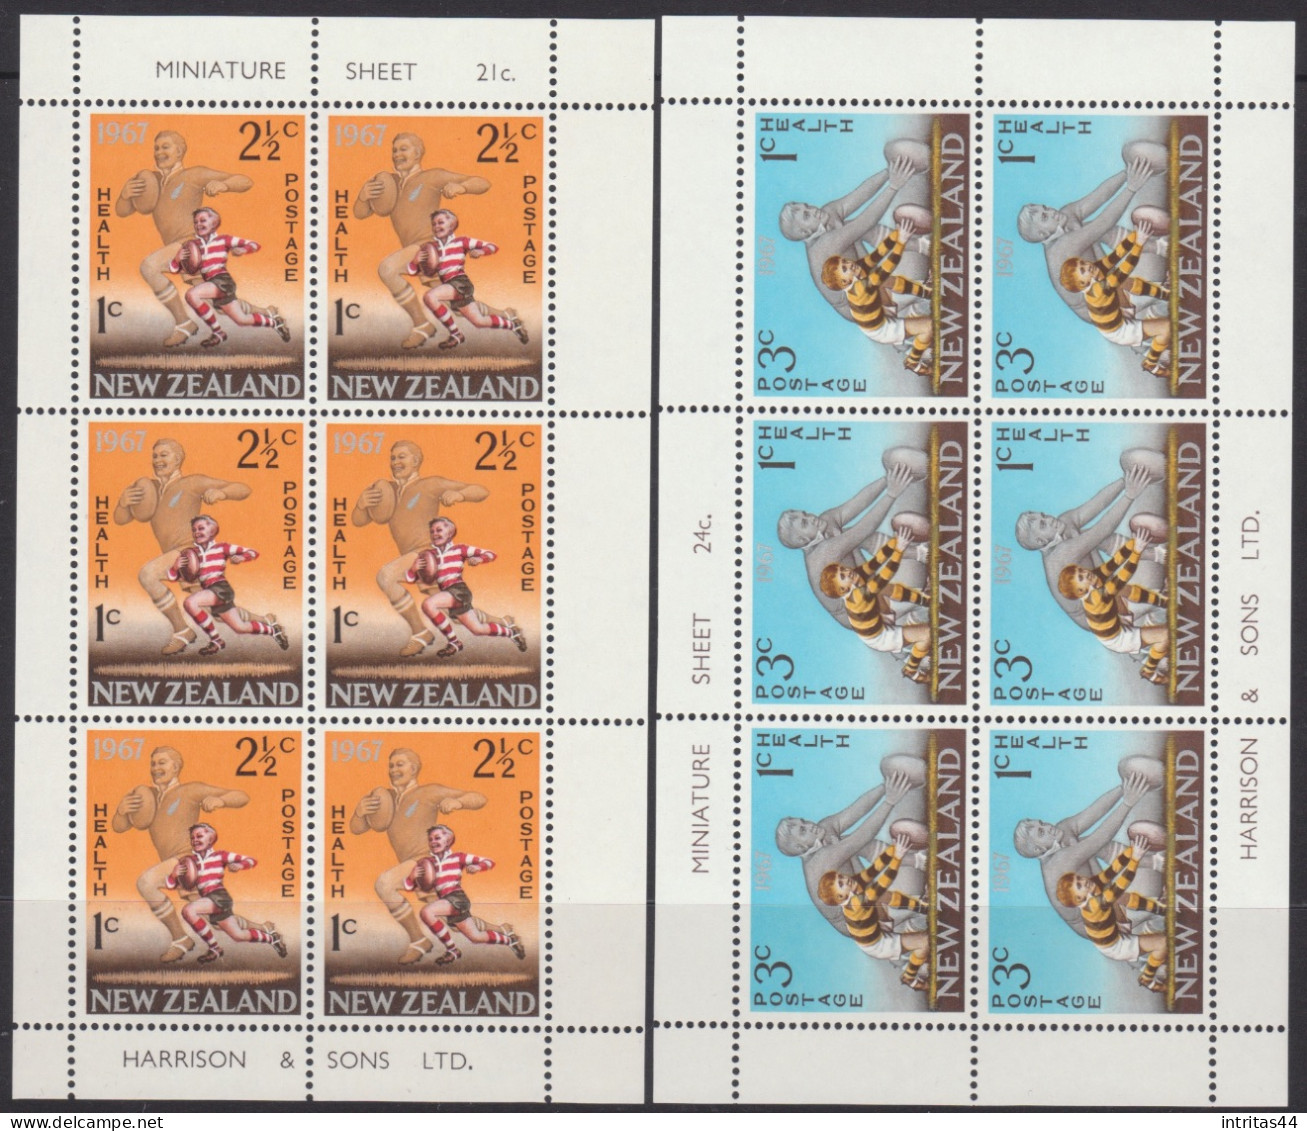 NEW ZEALAND 1967 HEALTH RUGBY (2) SHEETS MNH - Hojas Bloque